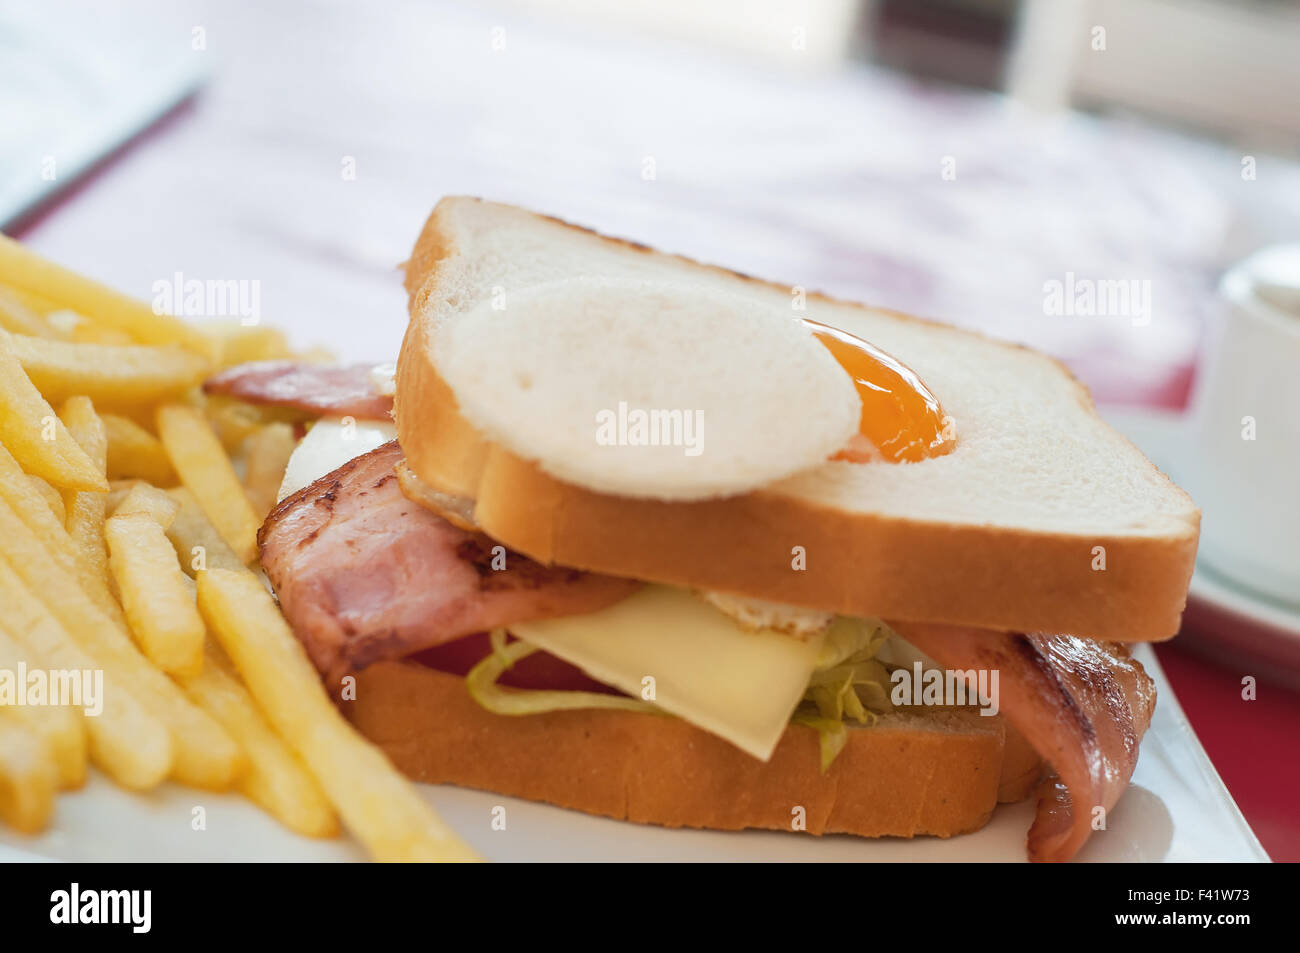 Sandwich with egg french fries Stock Photo